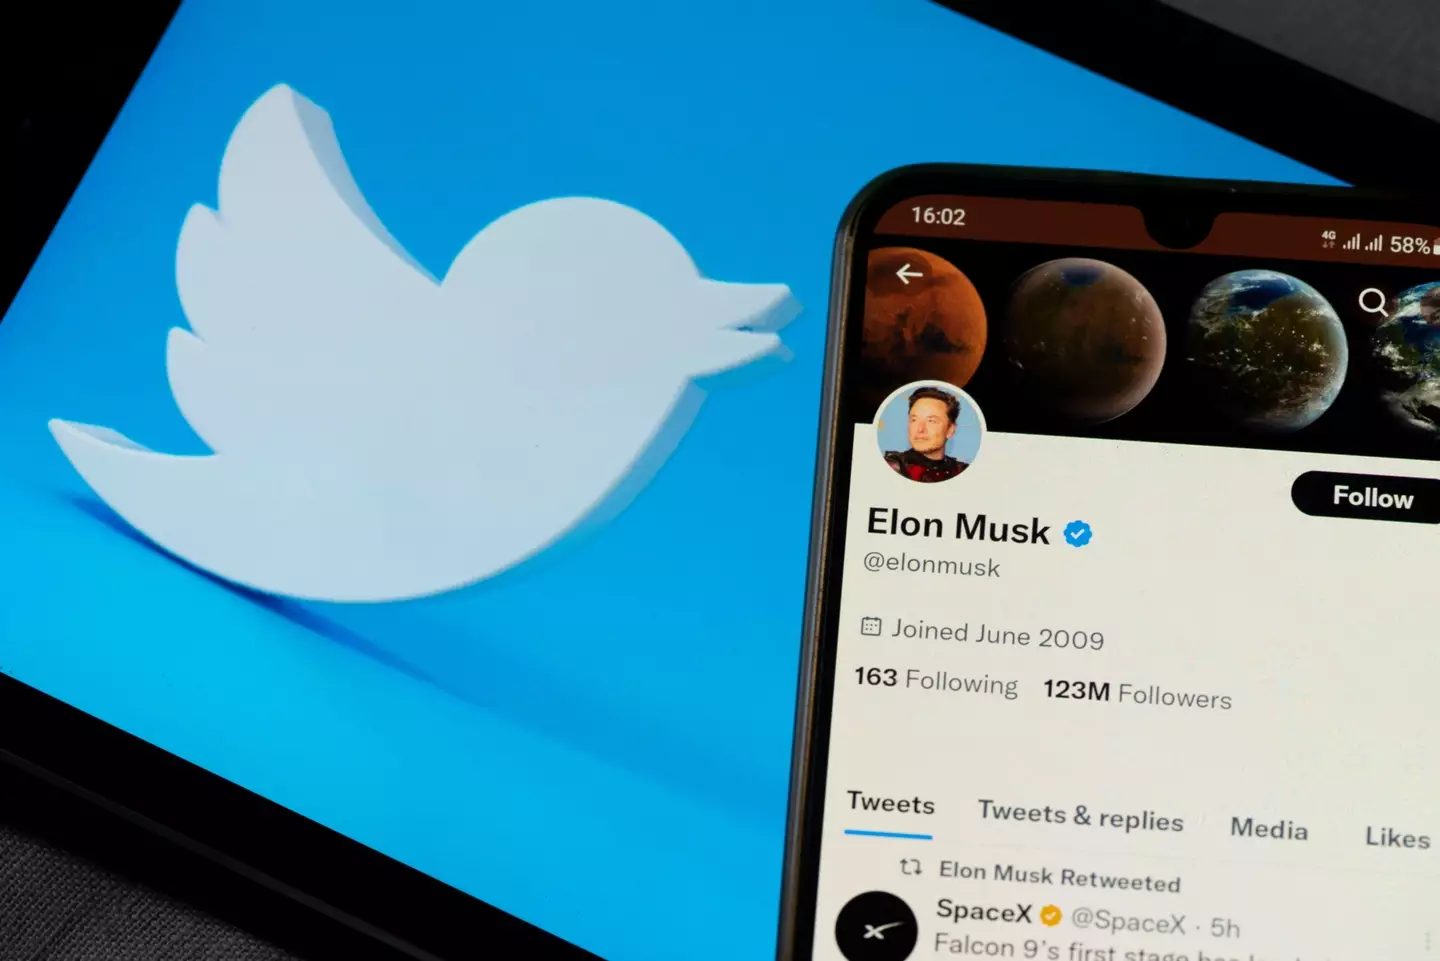 Musk hasn't been afraid to make controversial decisions since taking over Twitter.